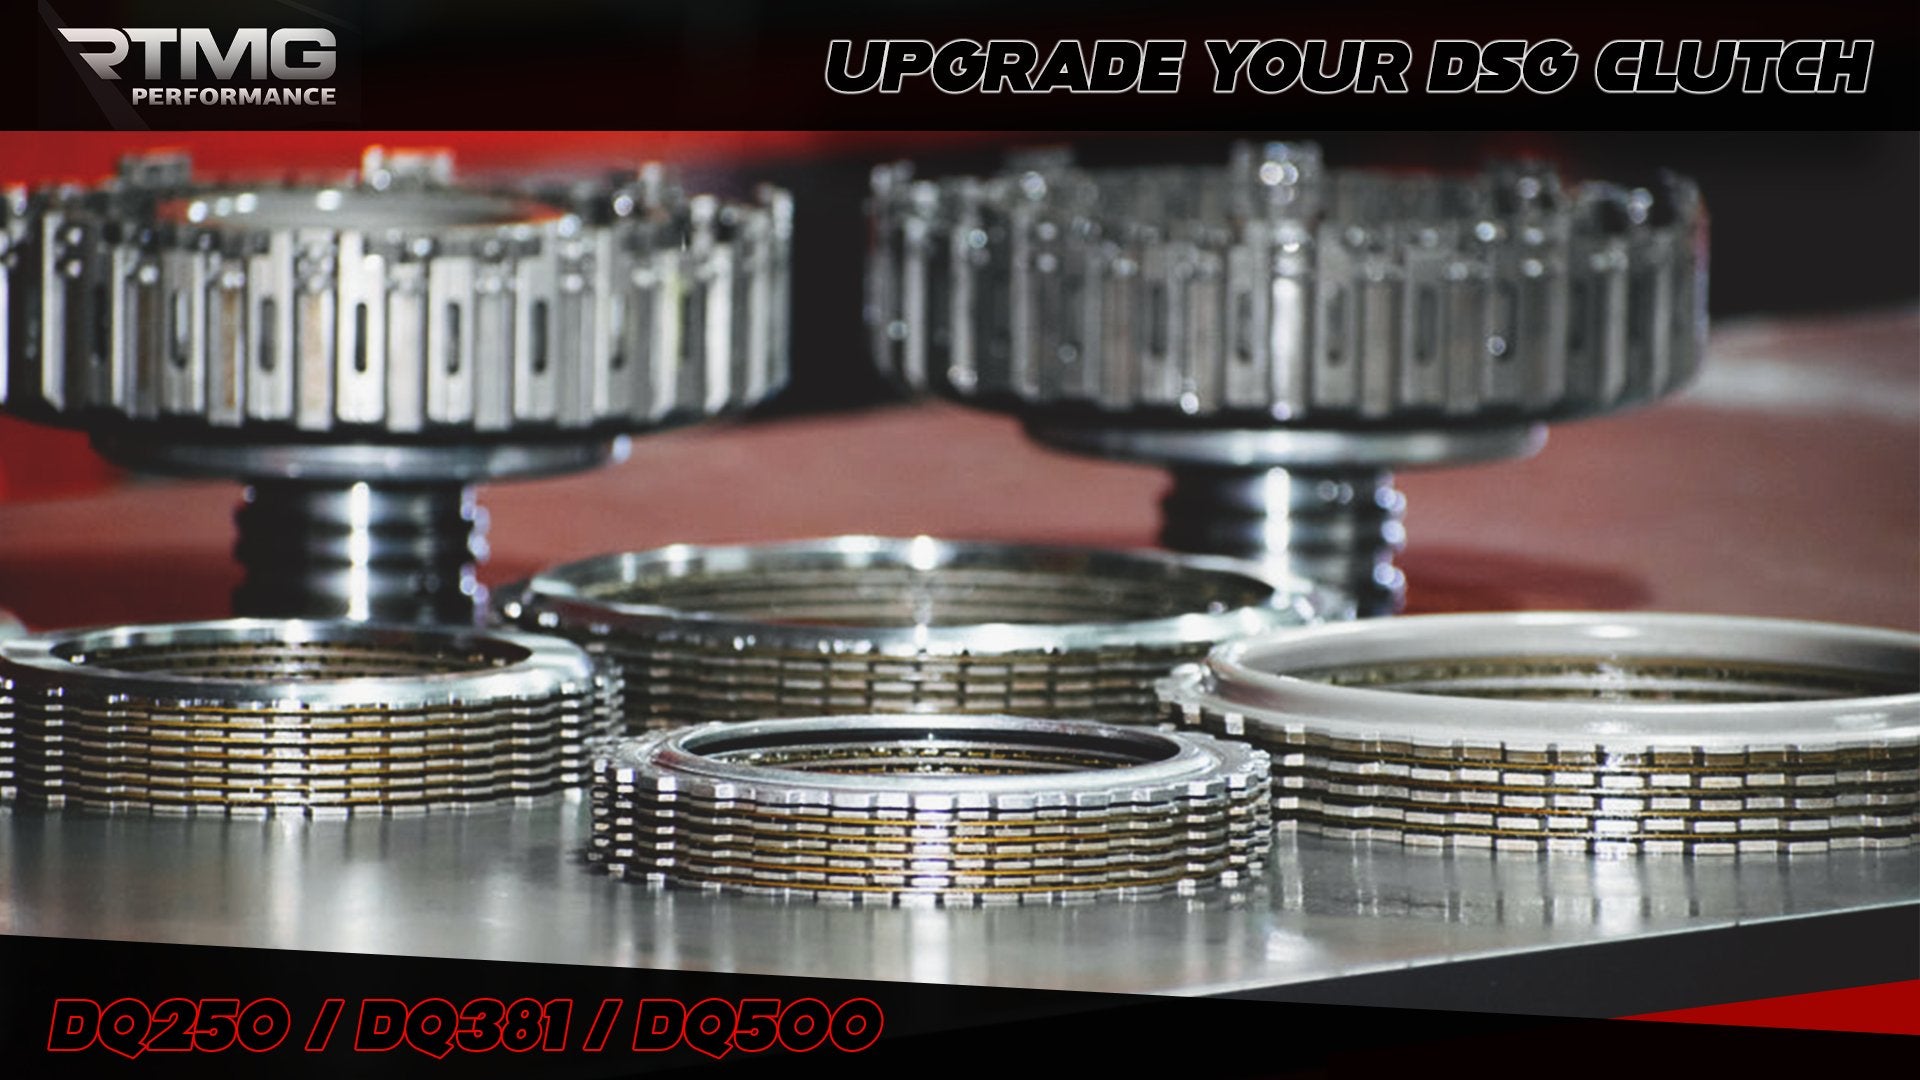 Upgrade your DSG Clutch Service - DSG DQ250 / DQ381 / DQ500